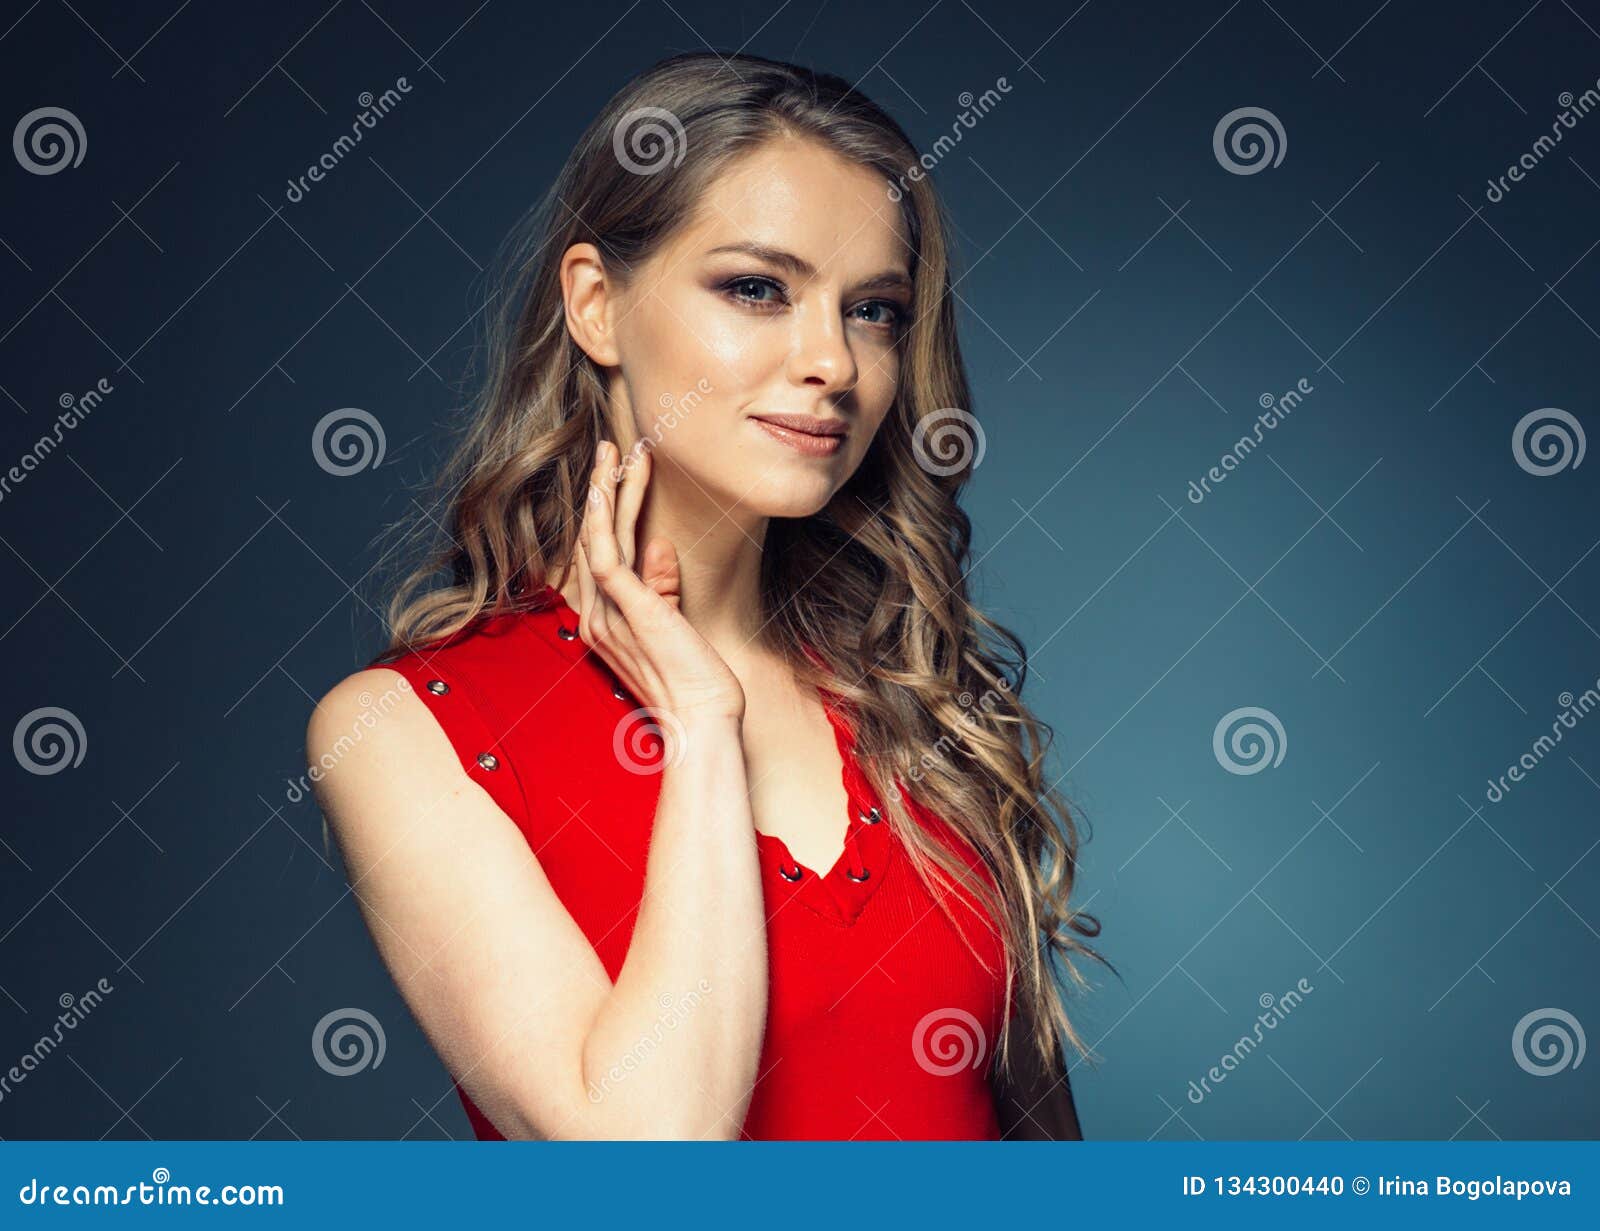 Woman in Red Dress with Long Blonde Hair Stock Photo - Image of breast ...